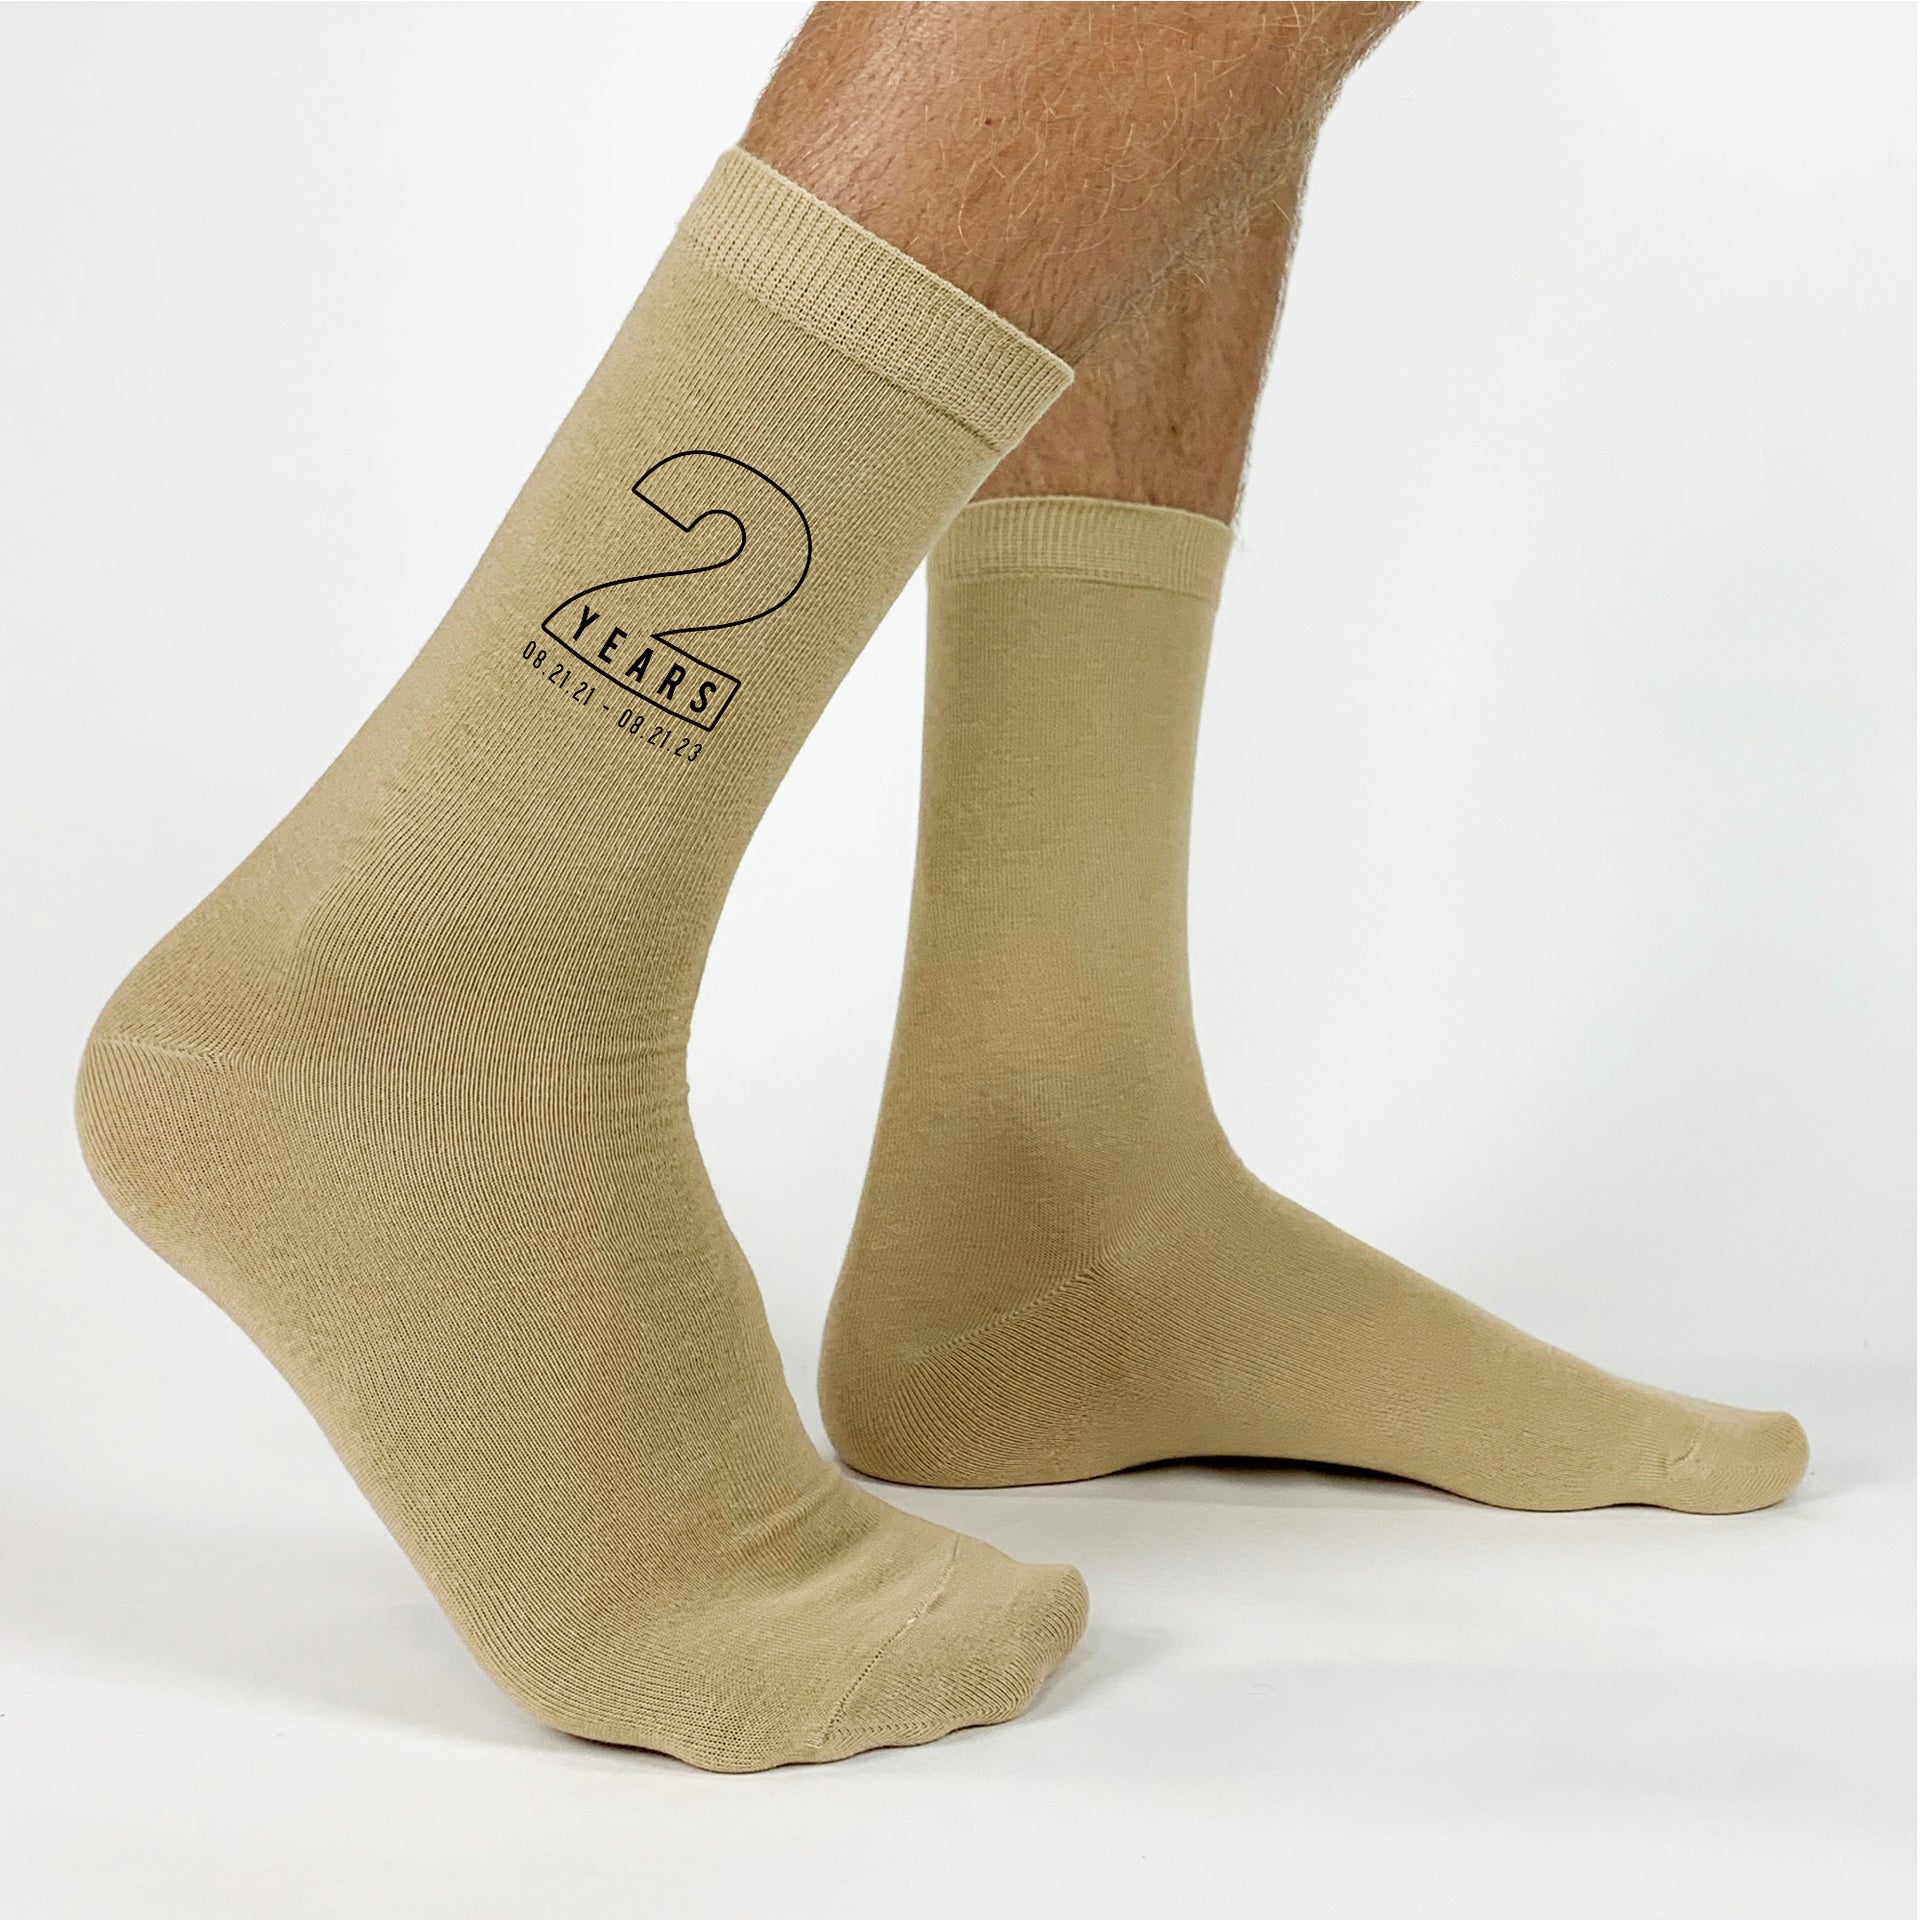 Two year anniversary digitally printed two and personalized with your wedding date printed on cotton socks.